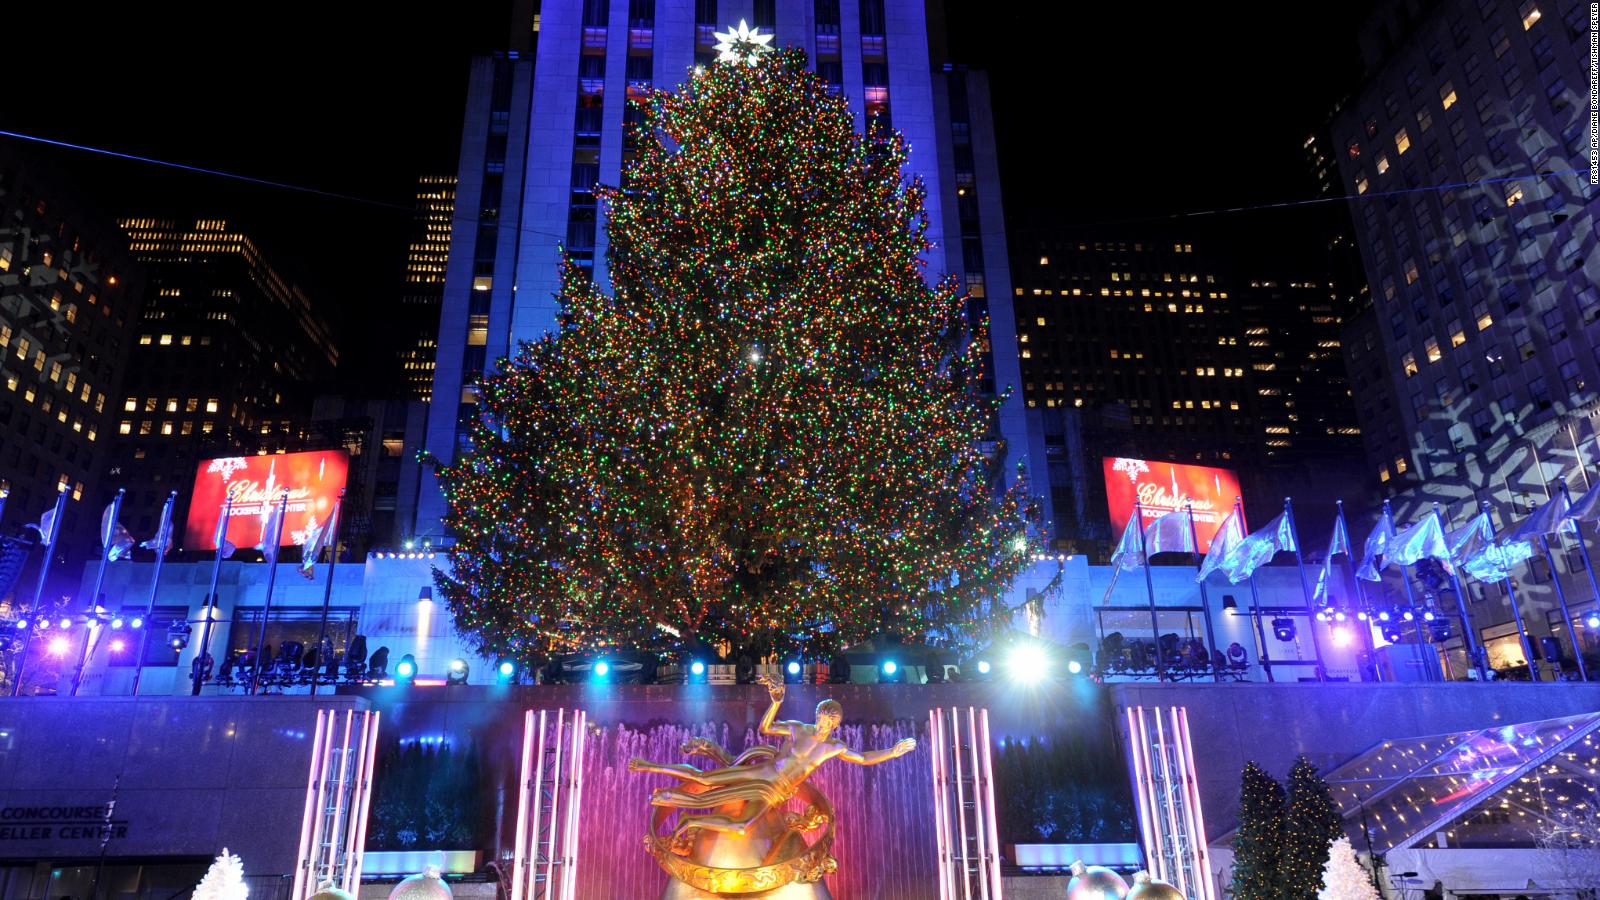 The 2019 Rockefeller Christmas tree was cut down